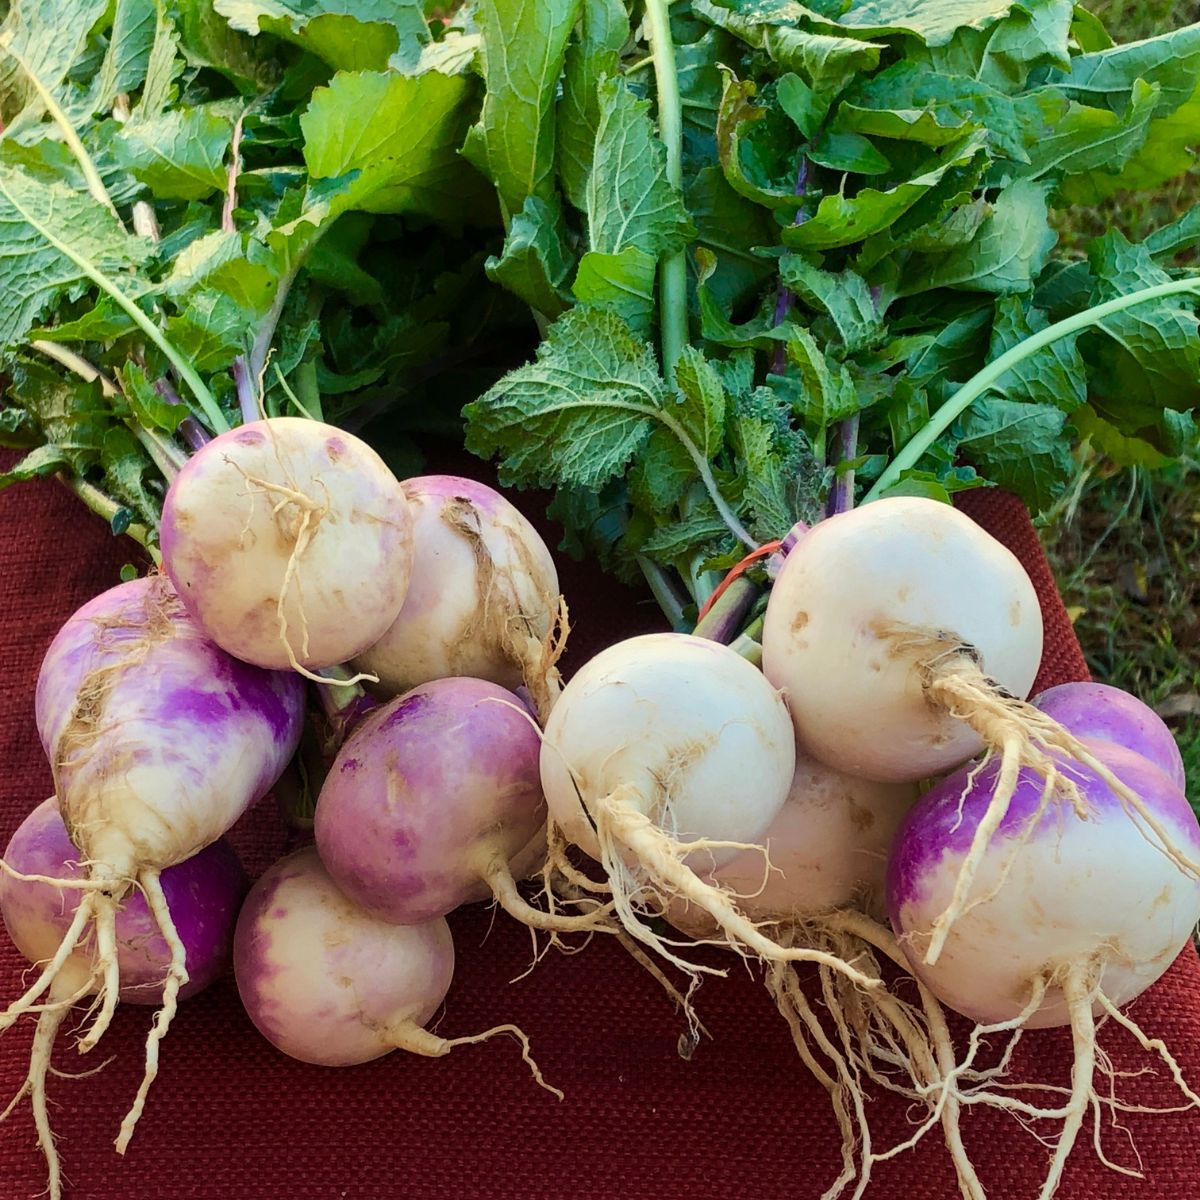 A bunch of purple and white turnips on a red cloth.